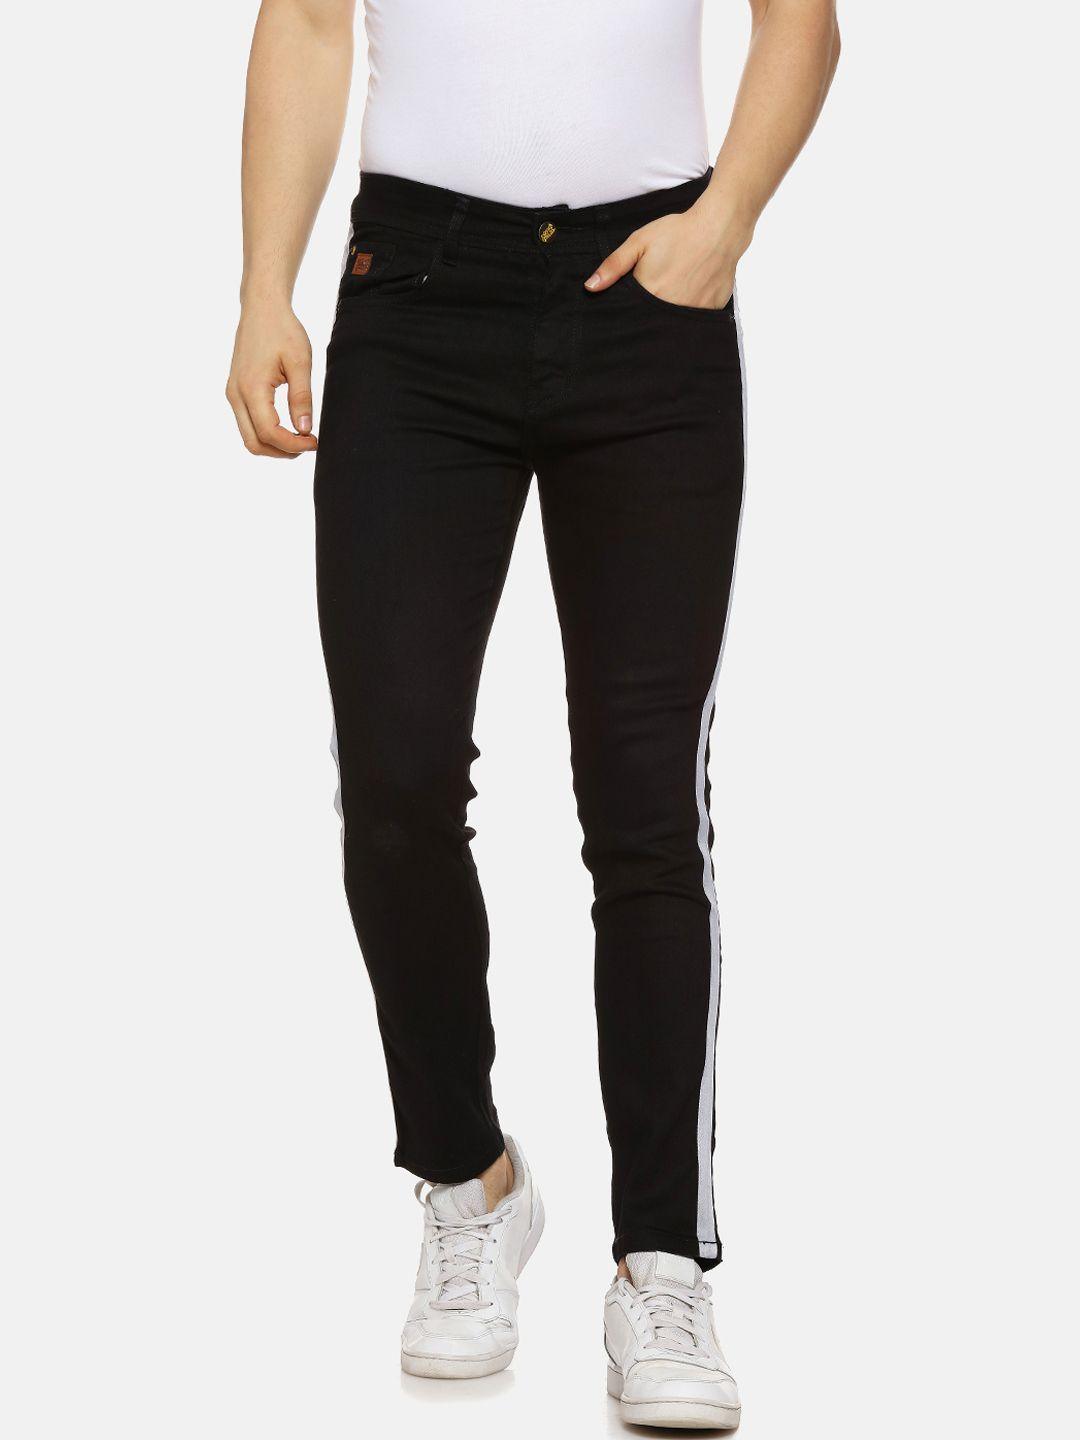 campus sutra men black slim fit mid-rise clean look stretchable jeans